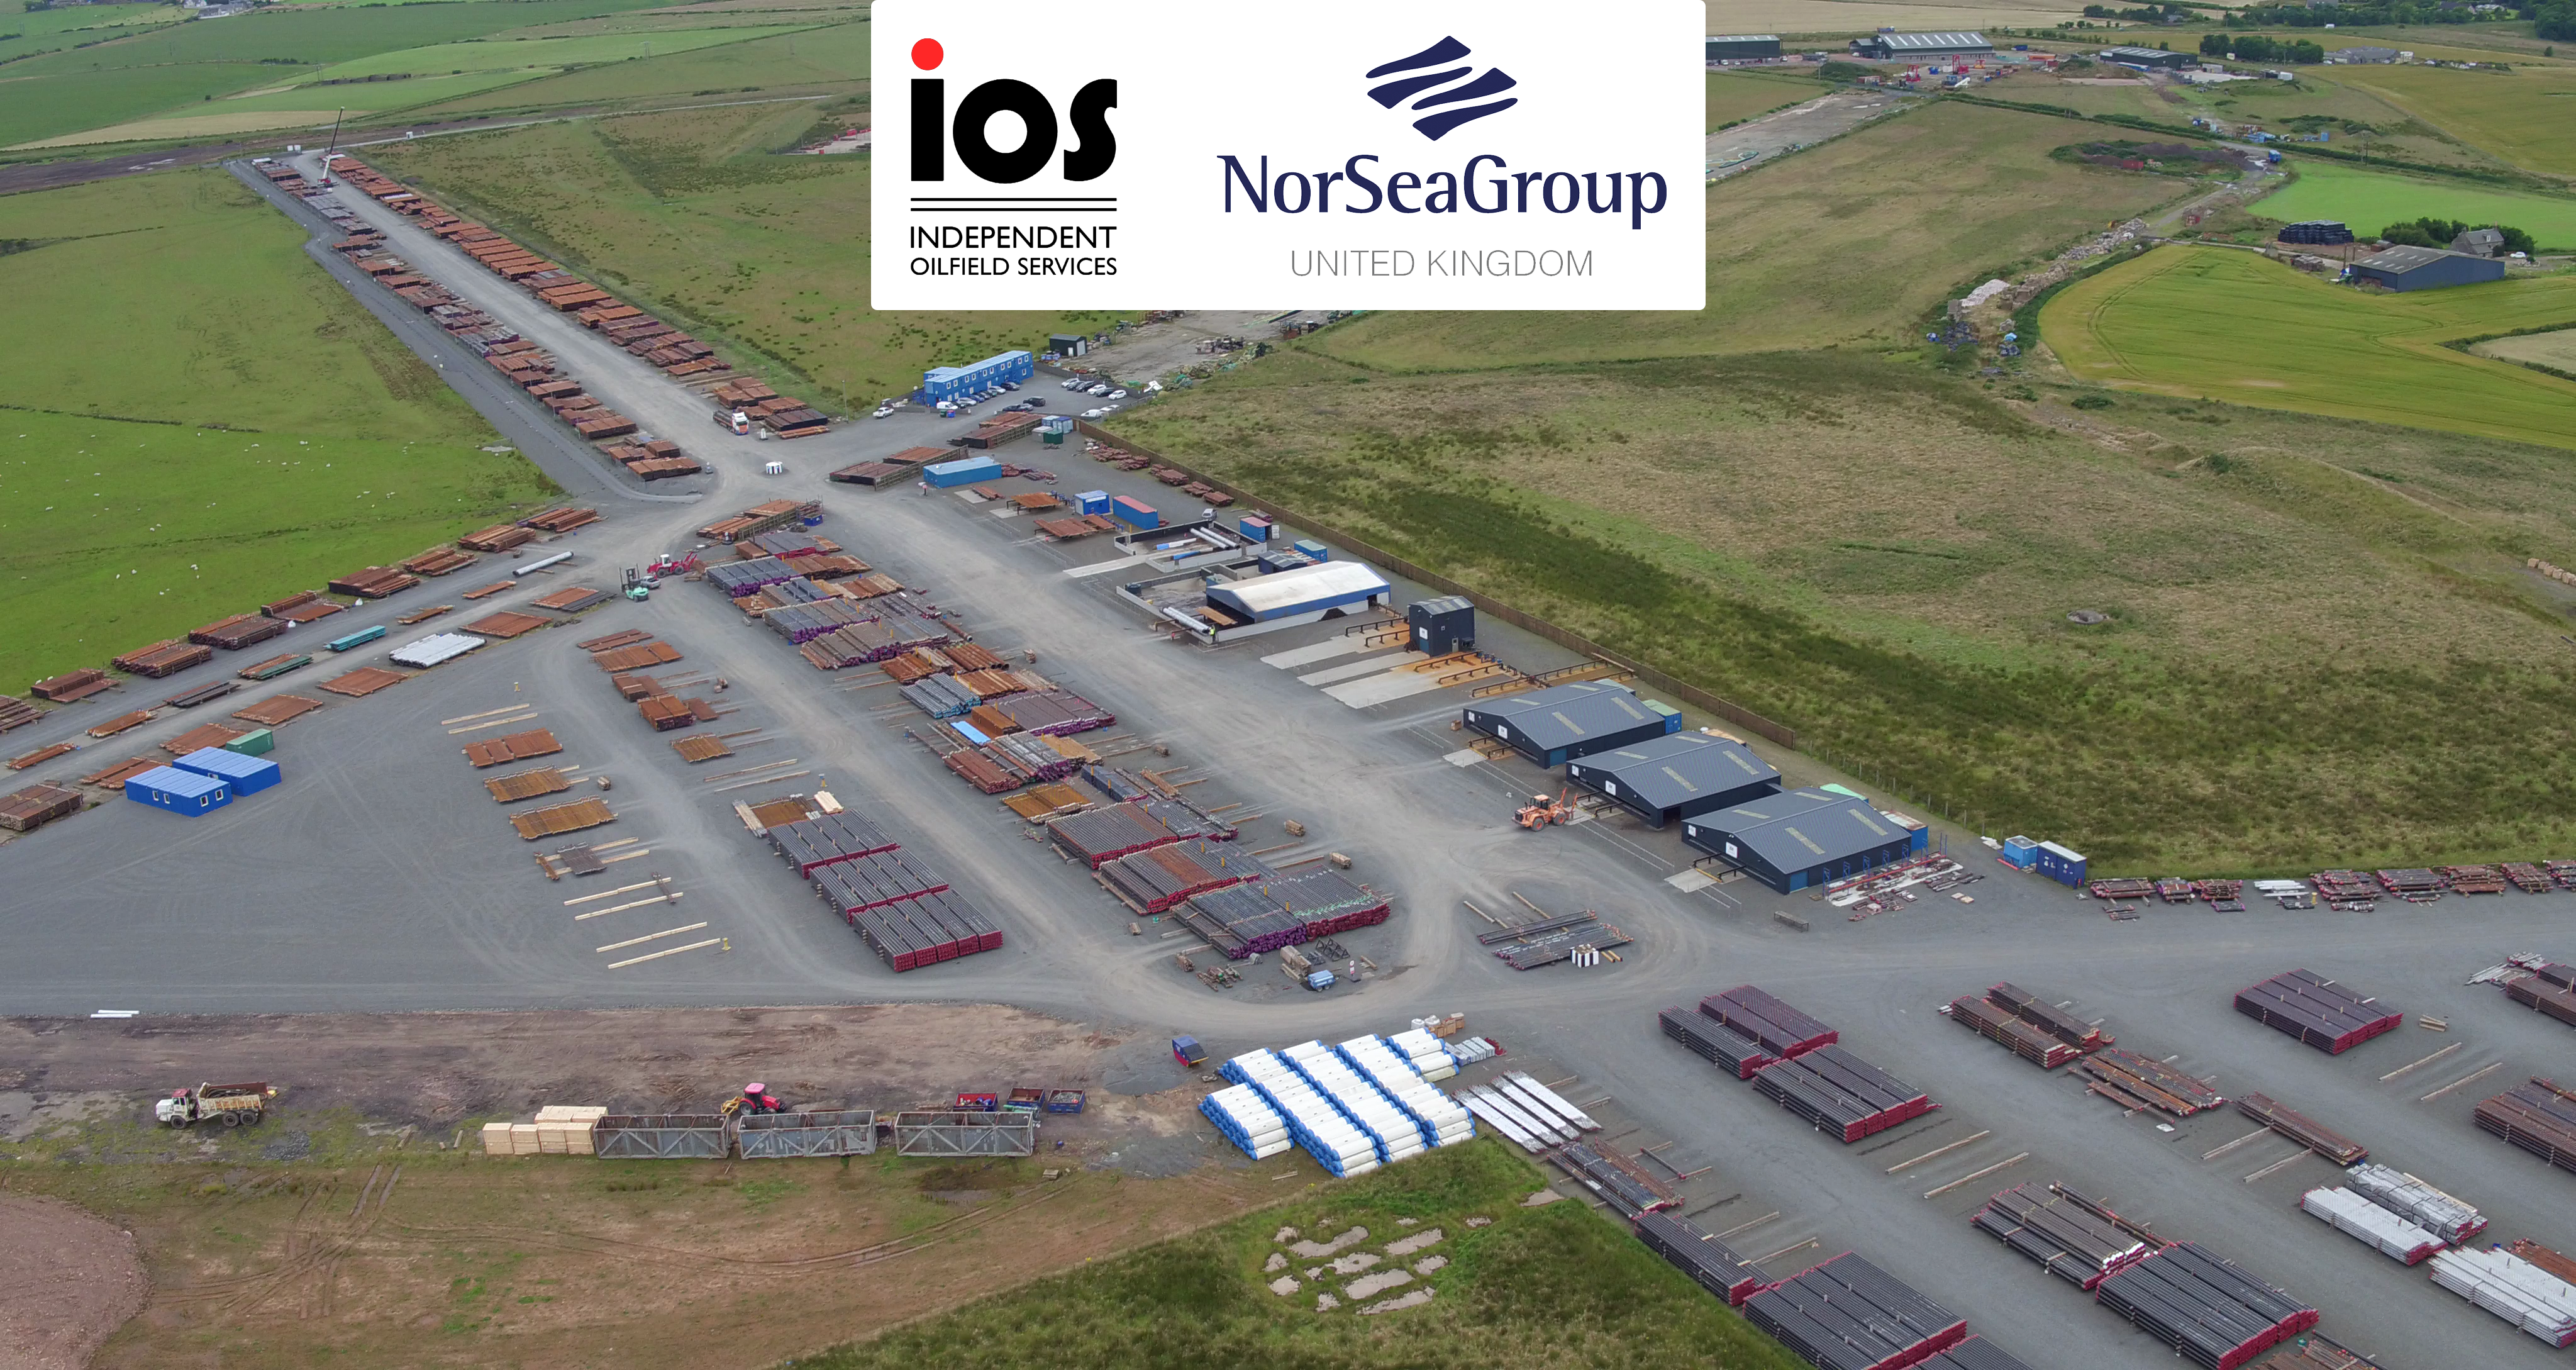 NorSea Group (UK) Ltd and Independent Oilfield Services (IOS) have formed an alliance to provide a complete logistics, storage and inspection package which will deliver significant cost benefits for energy sector companies operating in the north-east of Scotland.